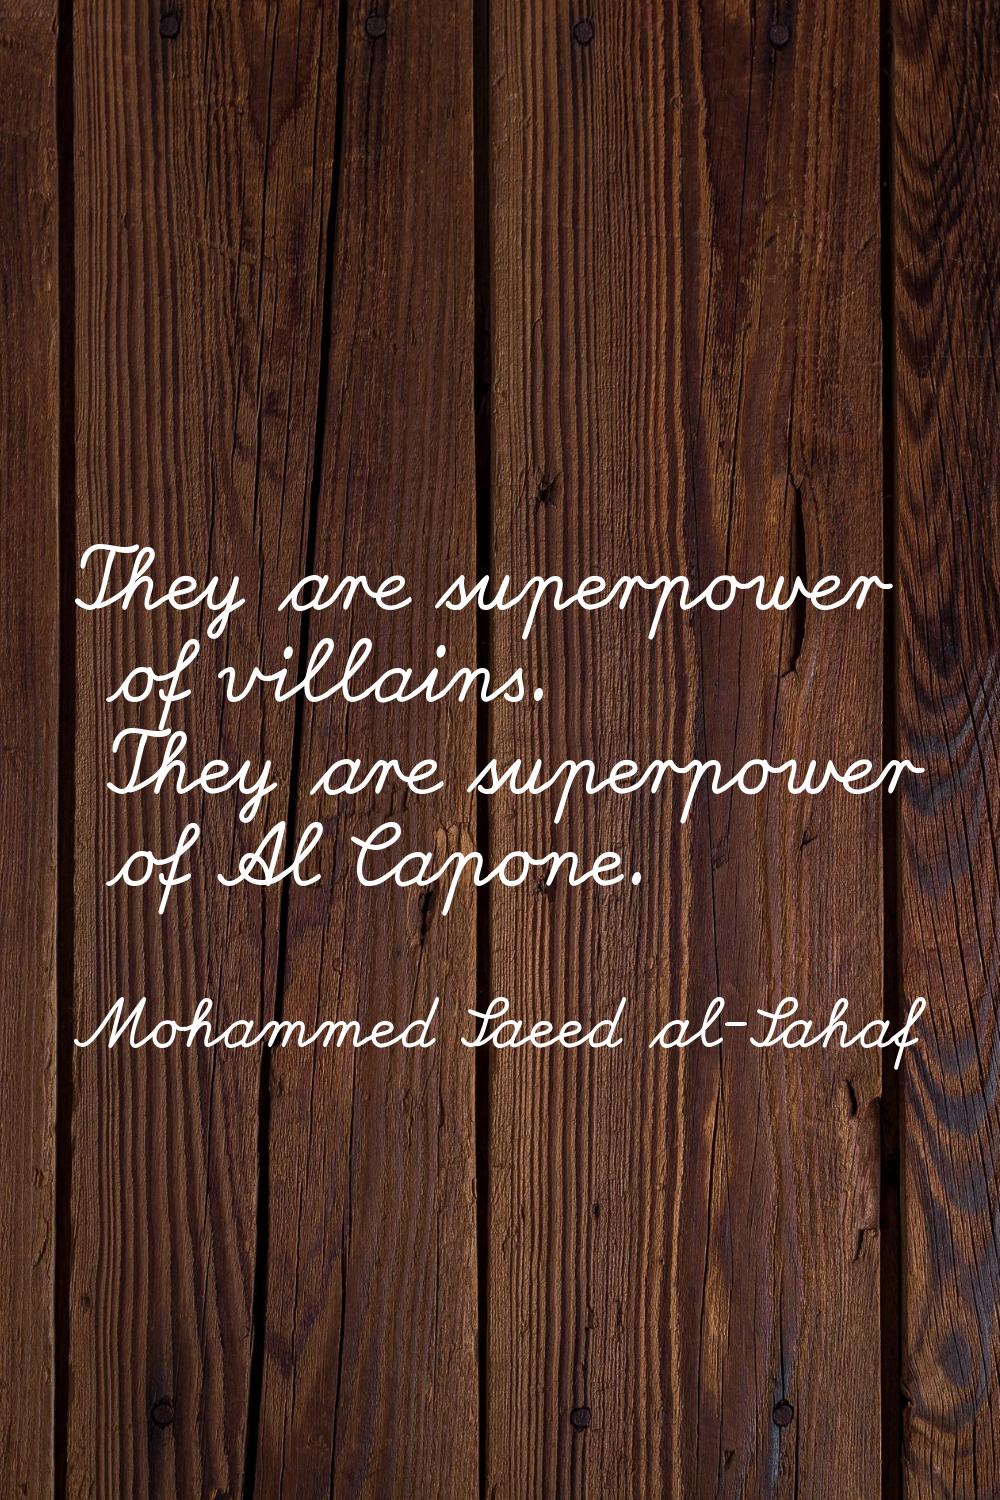 They are superpower of villains. They are superpower of Al Capone.